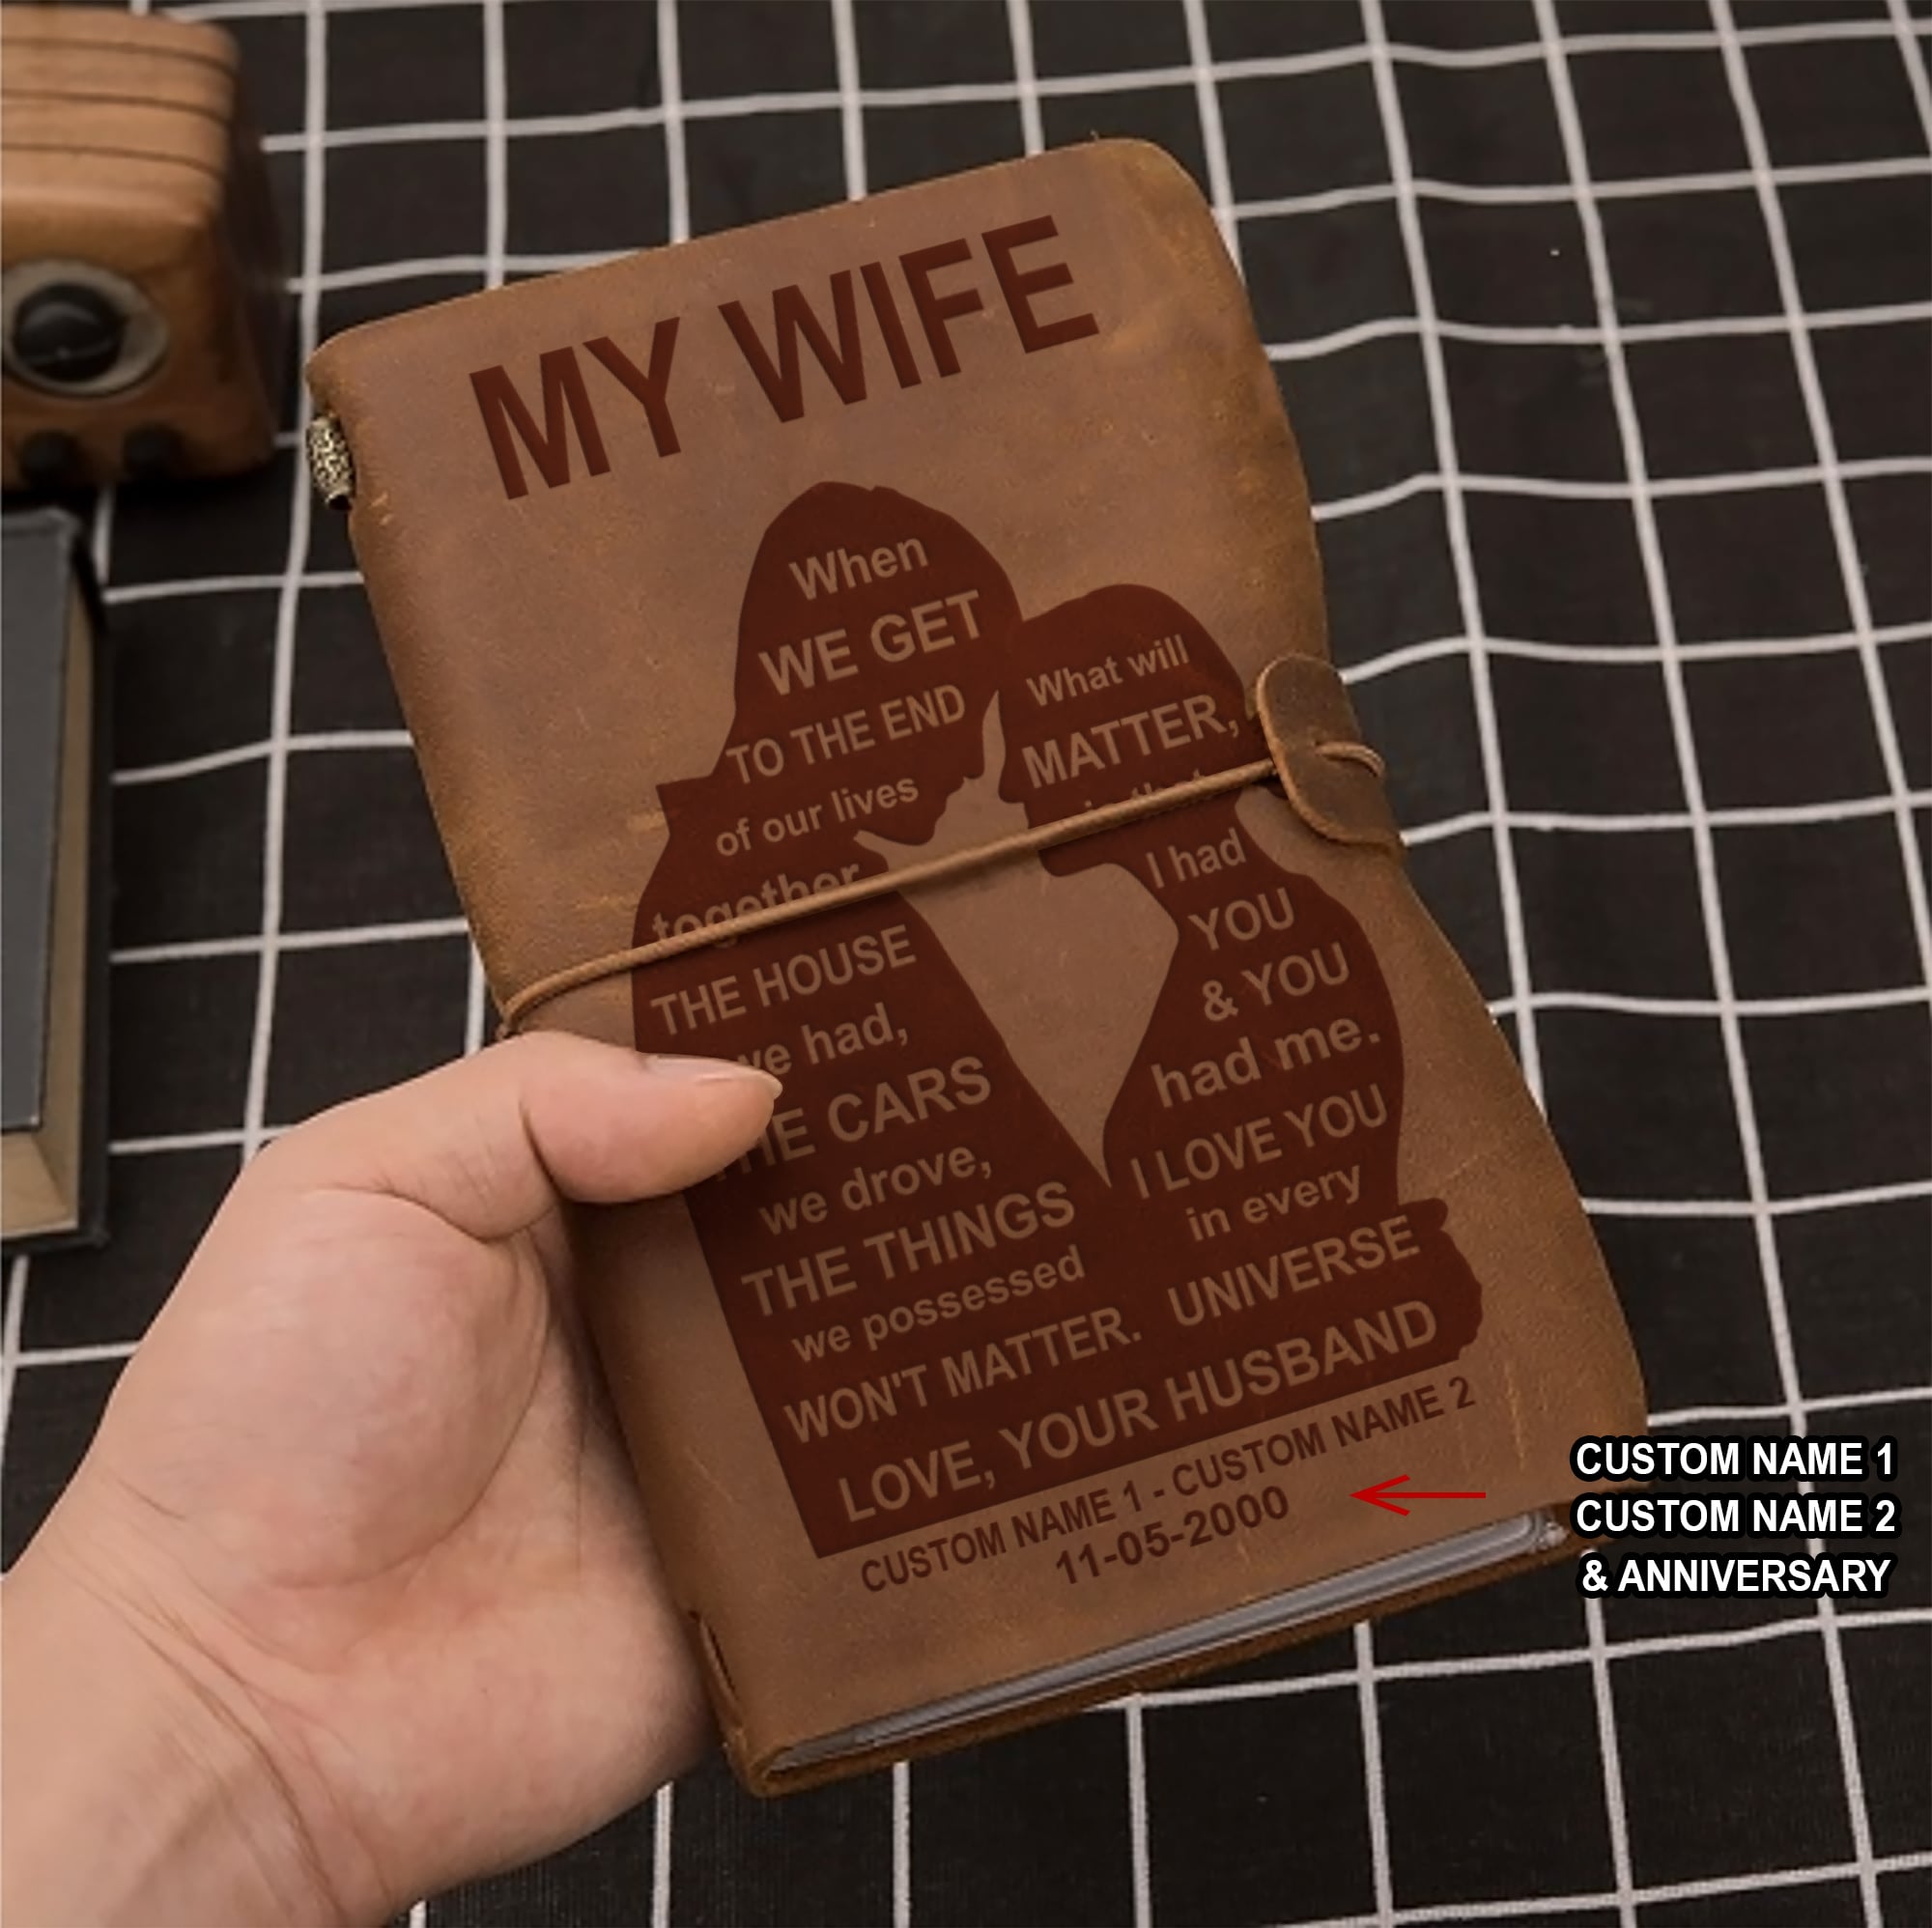 Perfect for anniversaries, birthdays, or just because-Vintage Journal Husband to wife When we get to the end of our lives together